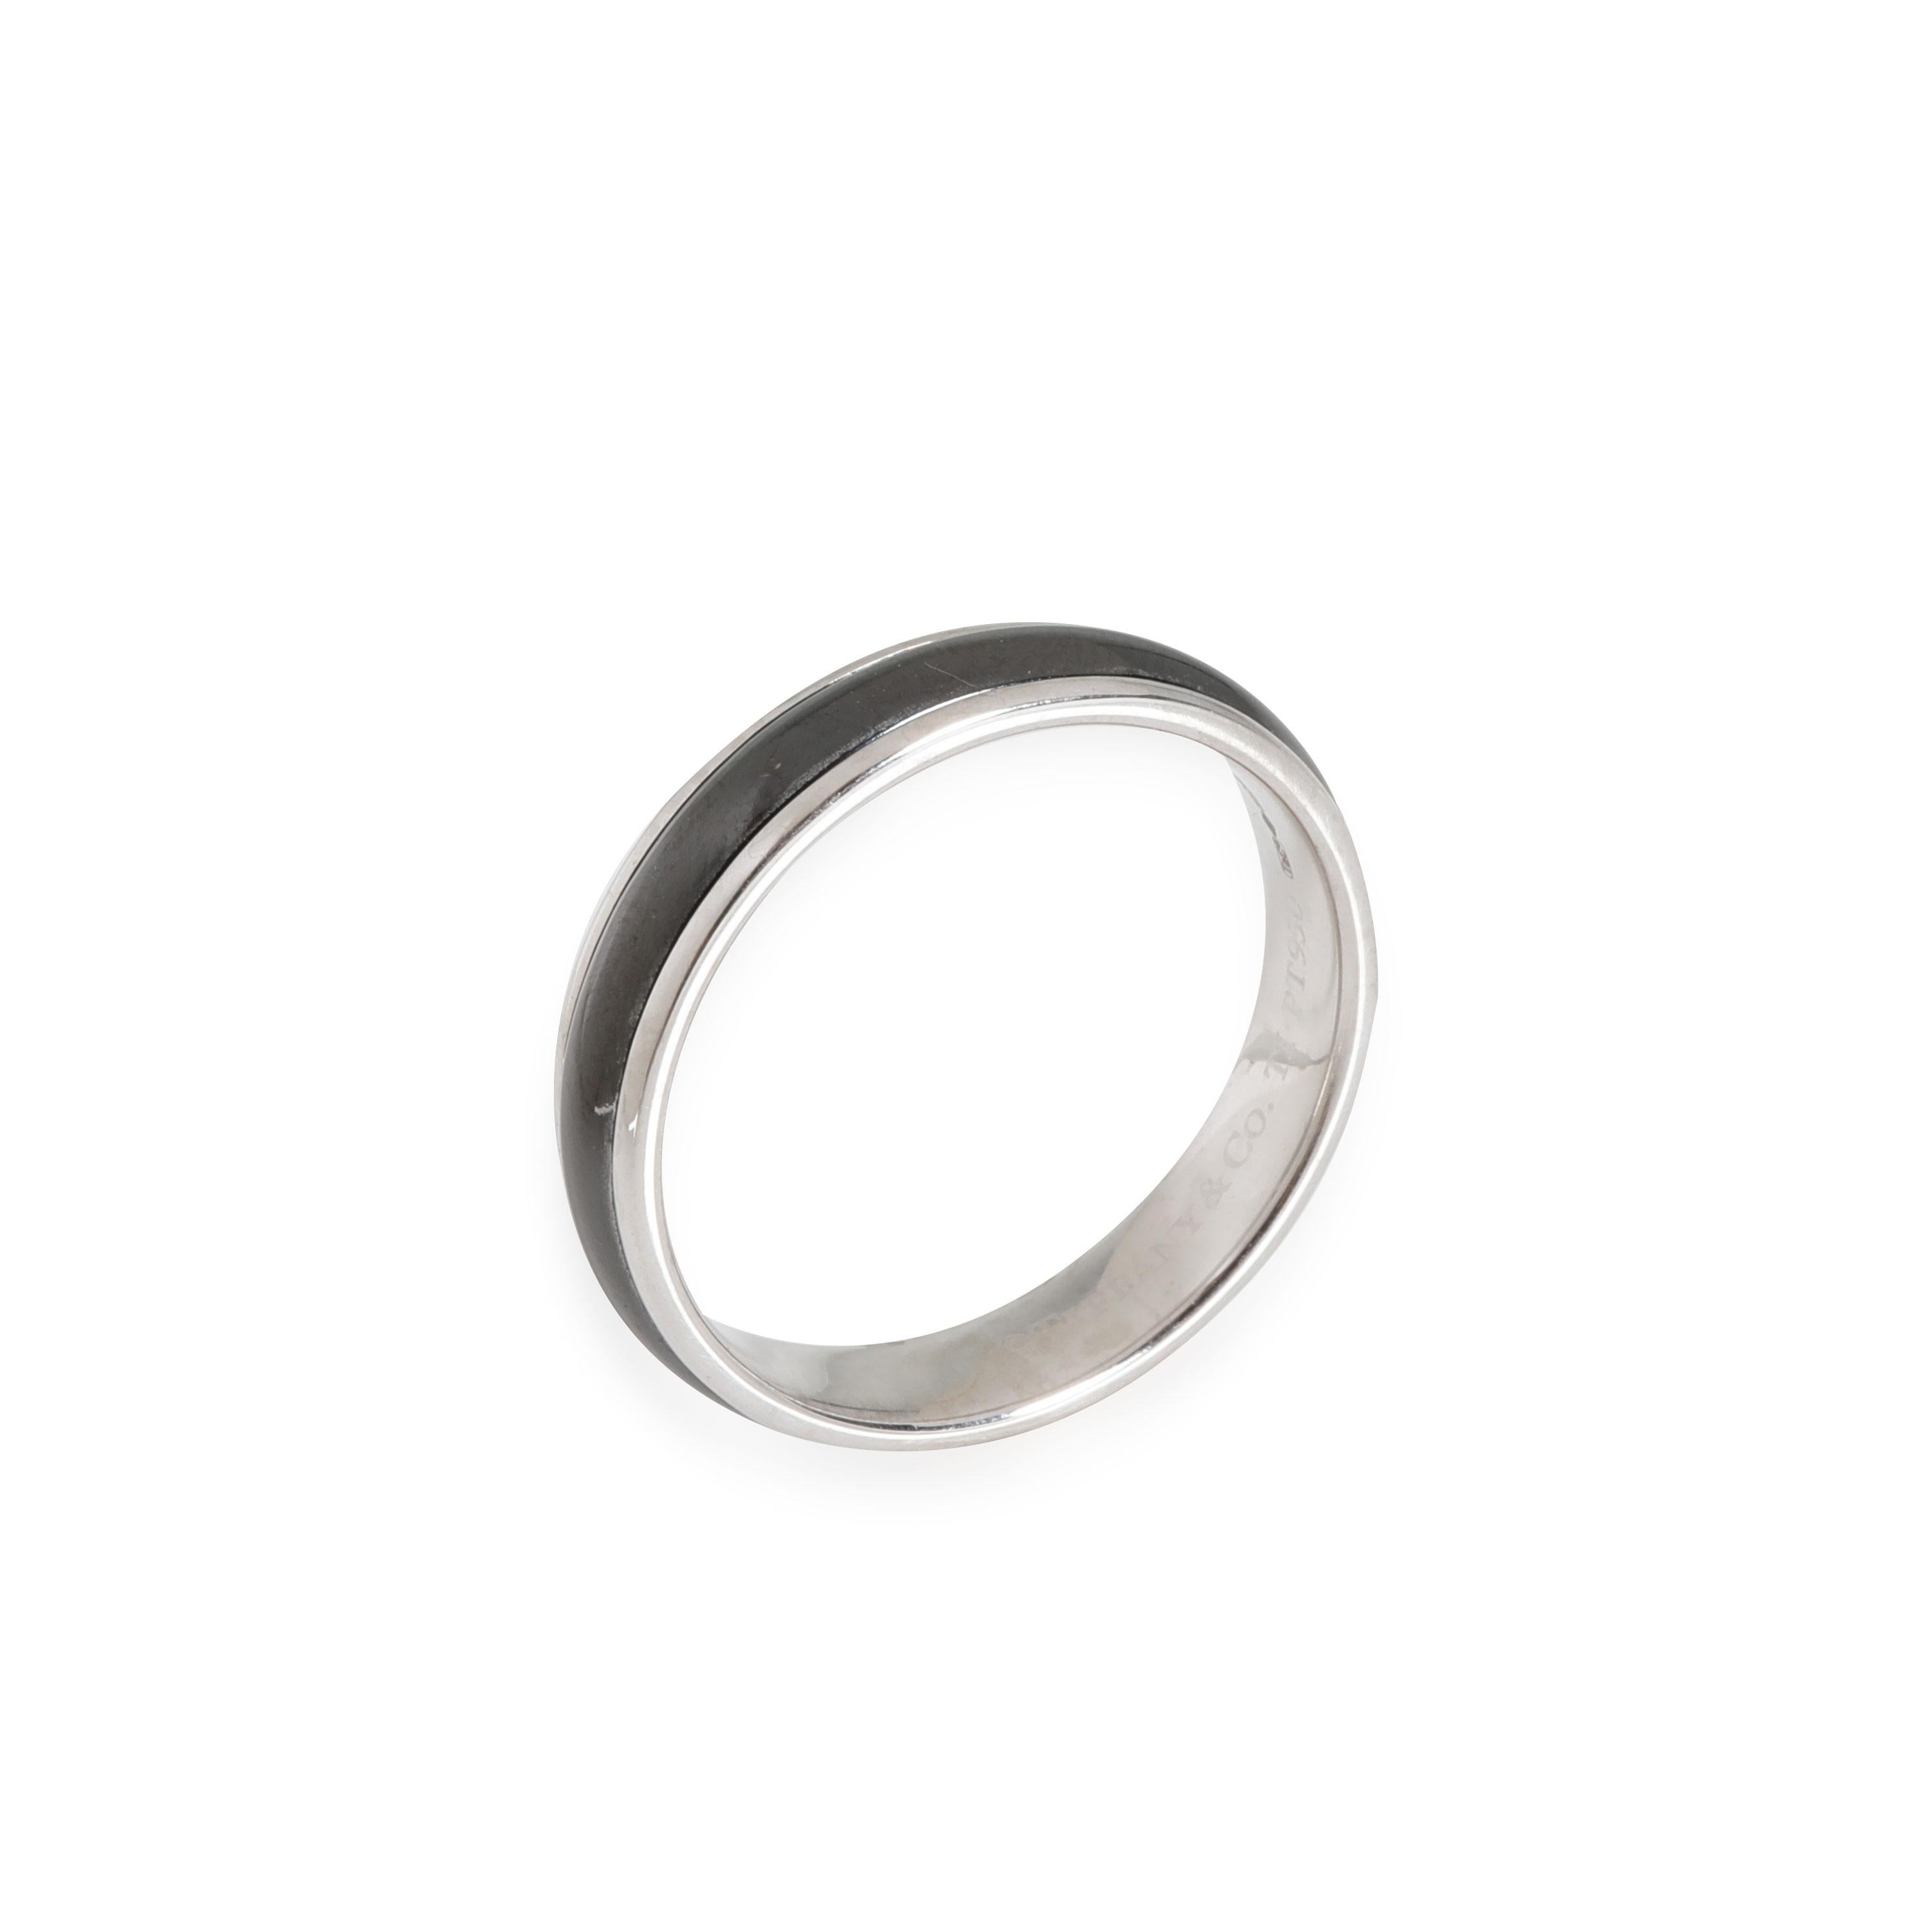 Tiffany & Co. Black Titanium Wedding Band in 950 Platinum

PRIMARY DETAILS
SKU: 116173
Listing Title: Tiffany & Co. Black Titanium Wedding Band in 950 Platinum
Condition Description: Retails for 1830 USD. In excellent condition and recently